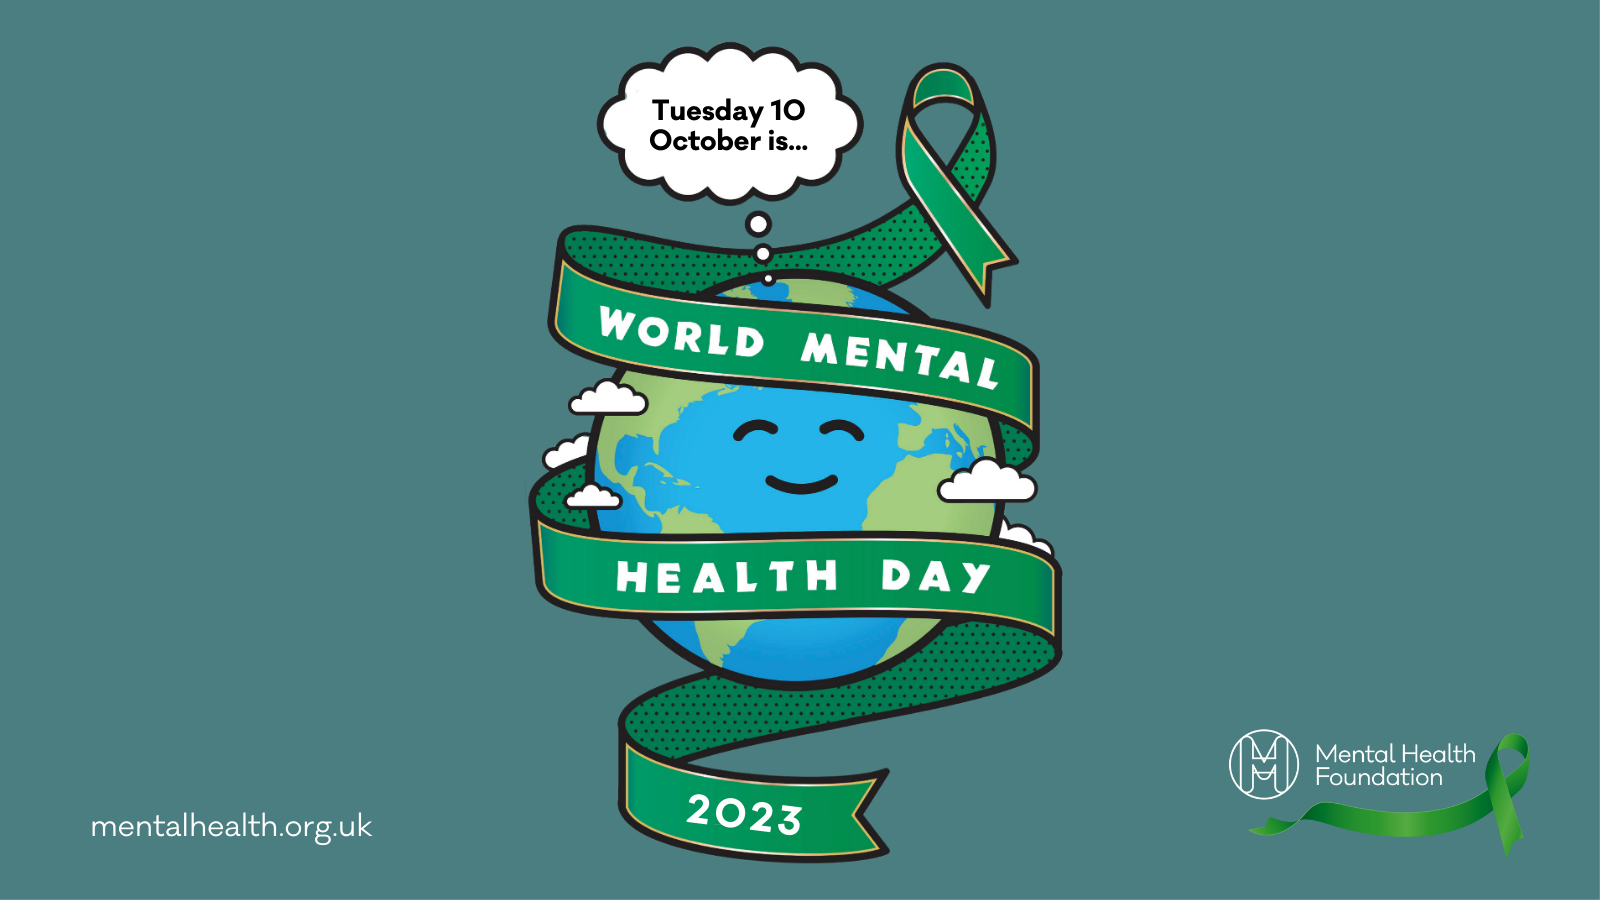 The logo for World Mental Health Day 2023, on a teal background.